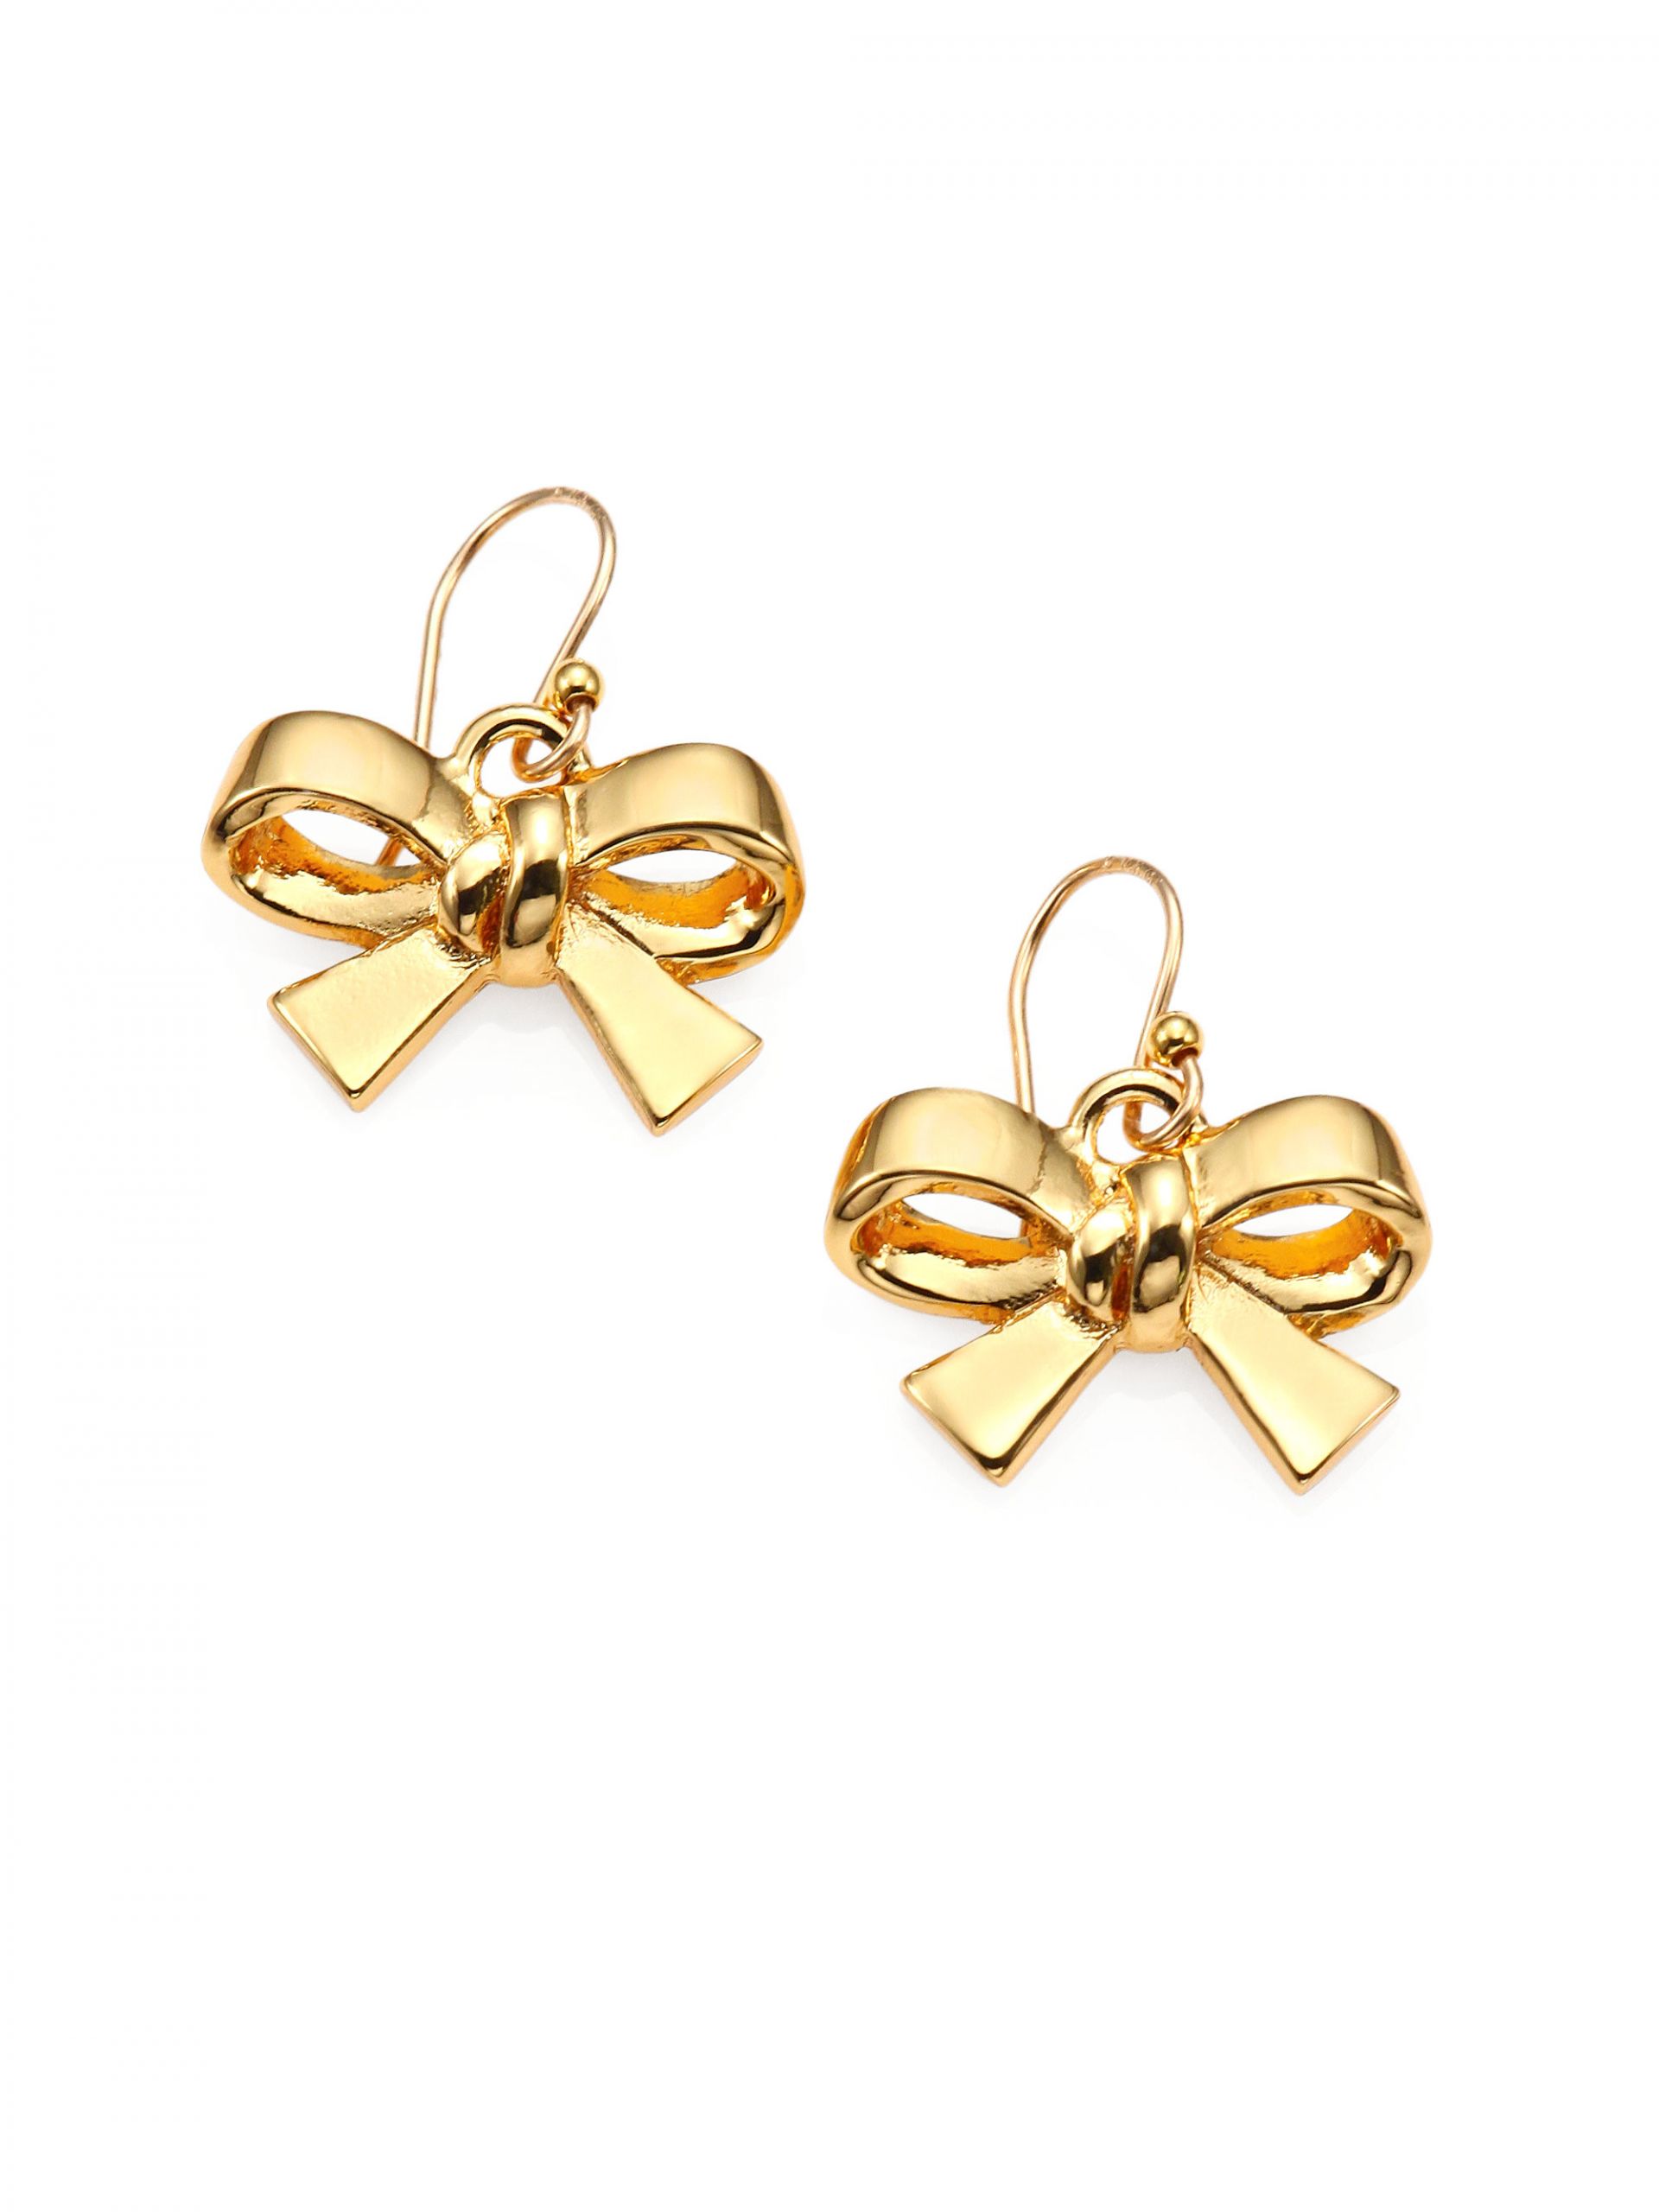 Kate Spade Christmas Bow Earrings
 Kate Spade Finishing Touch Bow Earrings in Gold